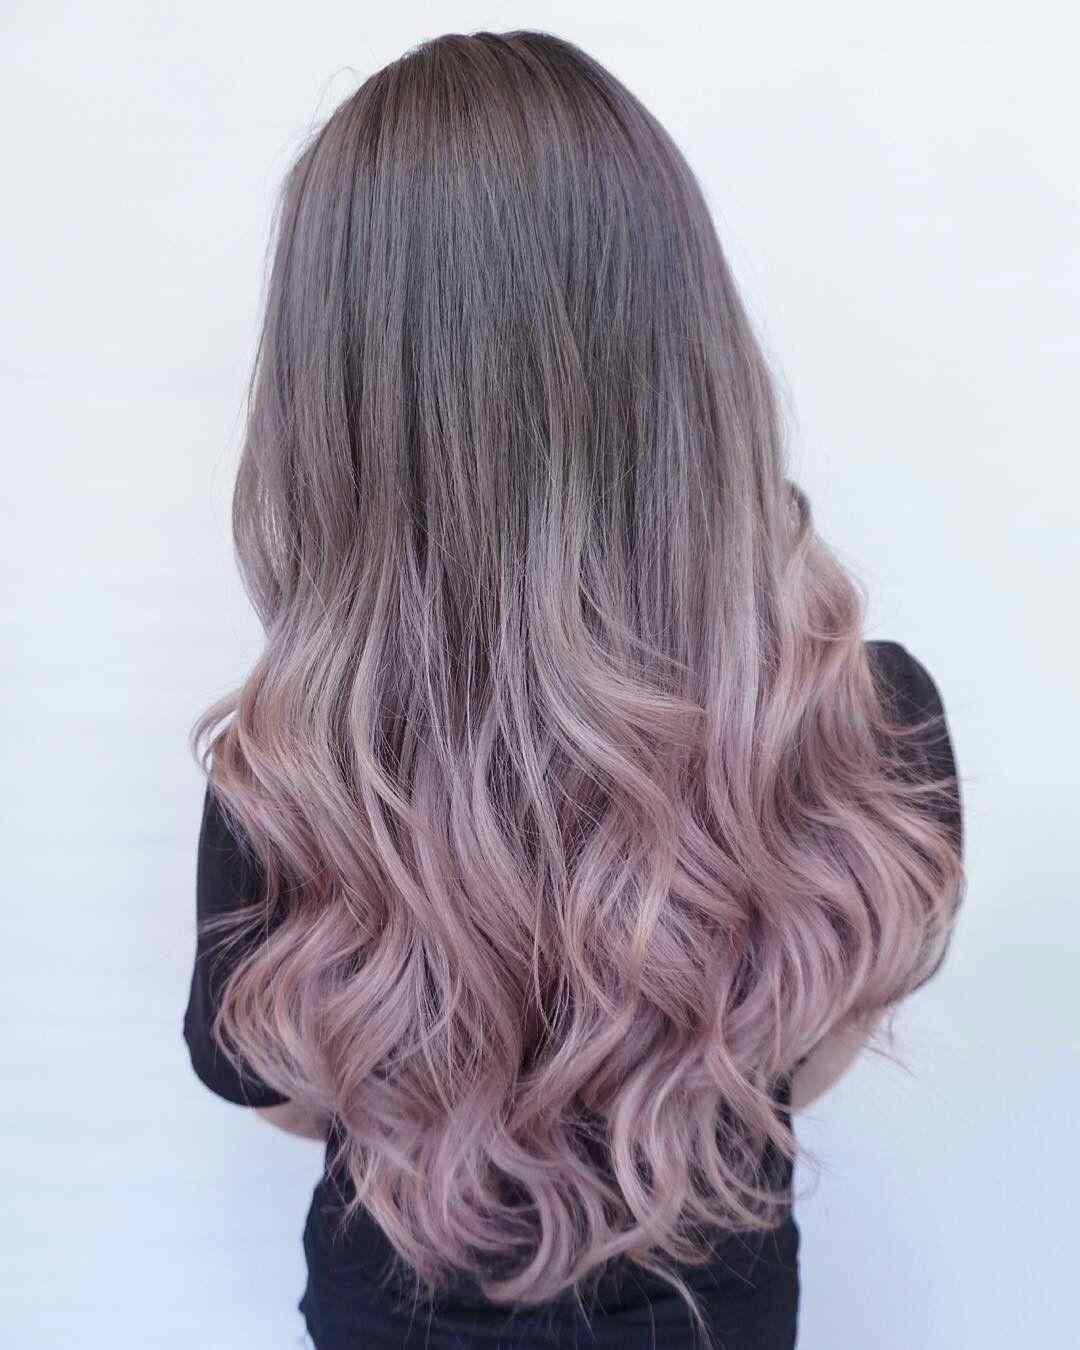 Gray pink hair color Ombre Look Silver Hair color make the same